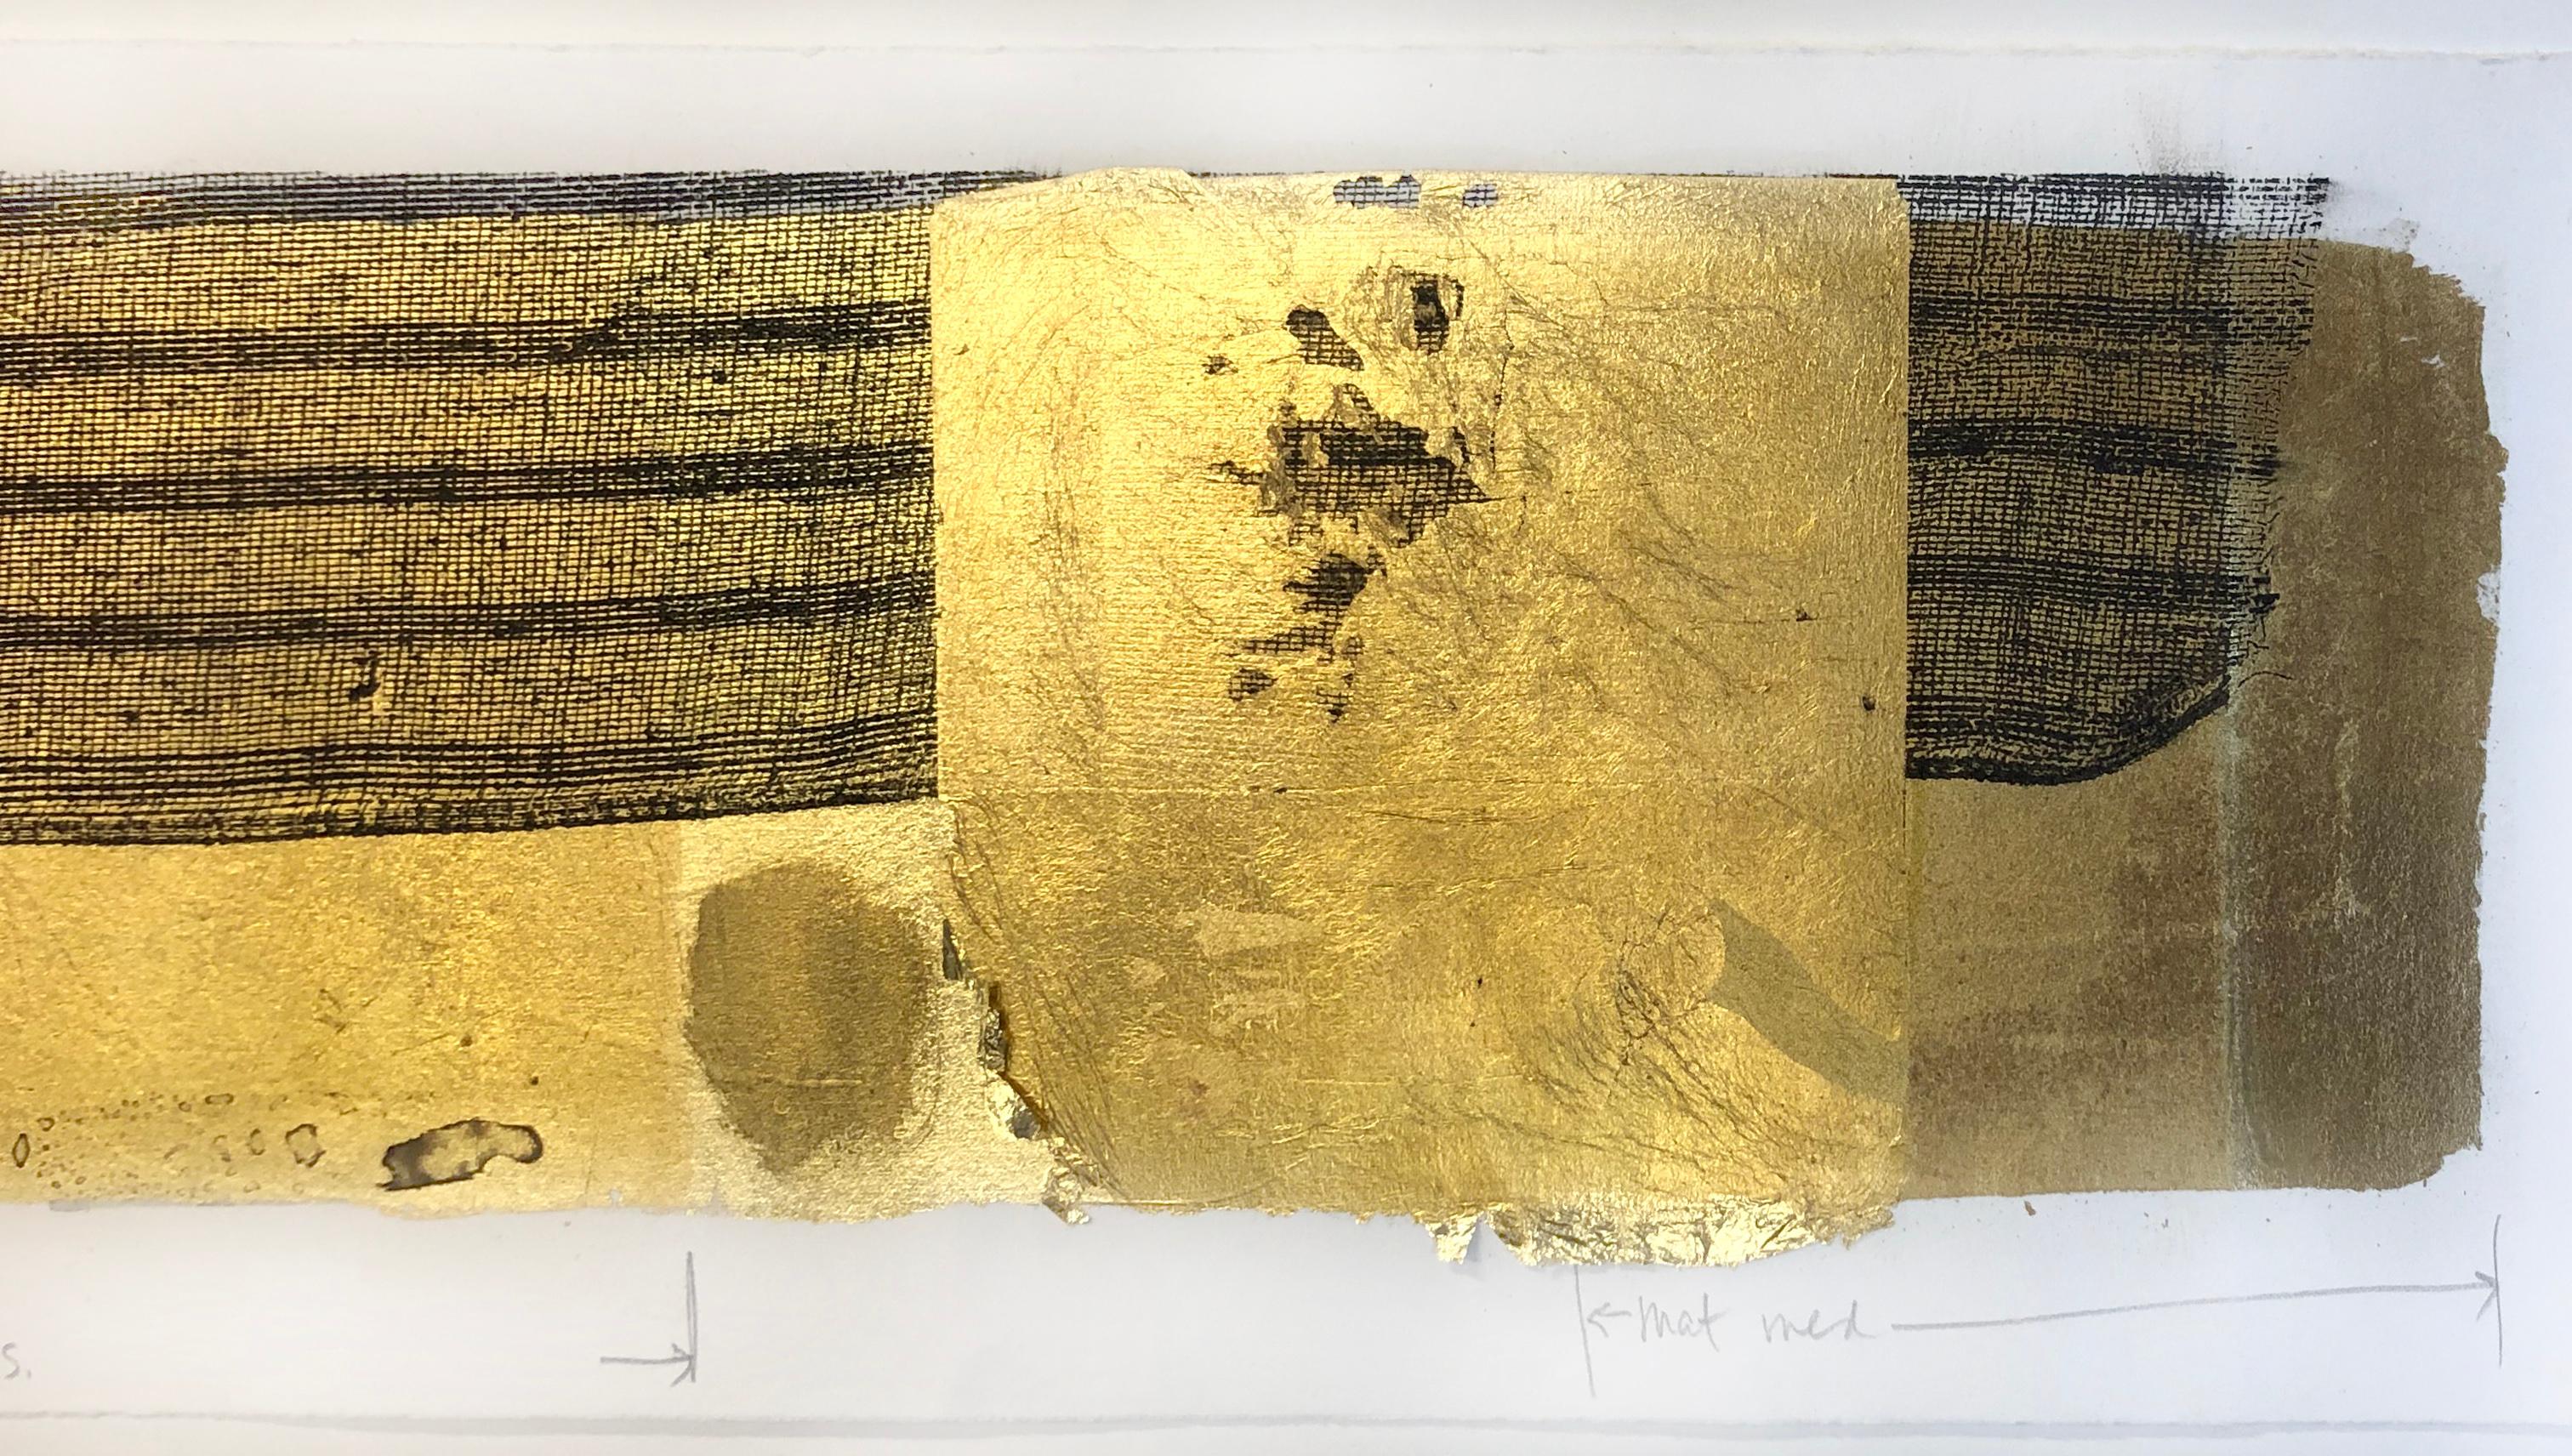 Stunning horizontal abstracted mesh and gold-leaf lithograph on heavy bond paper with artist's protocol notes (for future projects) by Patricia A. Pearce (American, b. 1948). Unsigned. Purchased as part of artist's estate/collection. Presented in